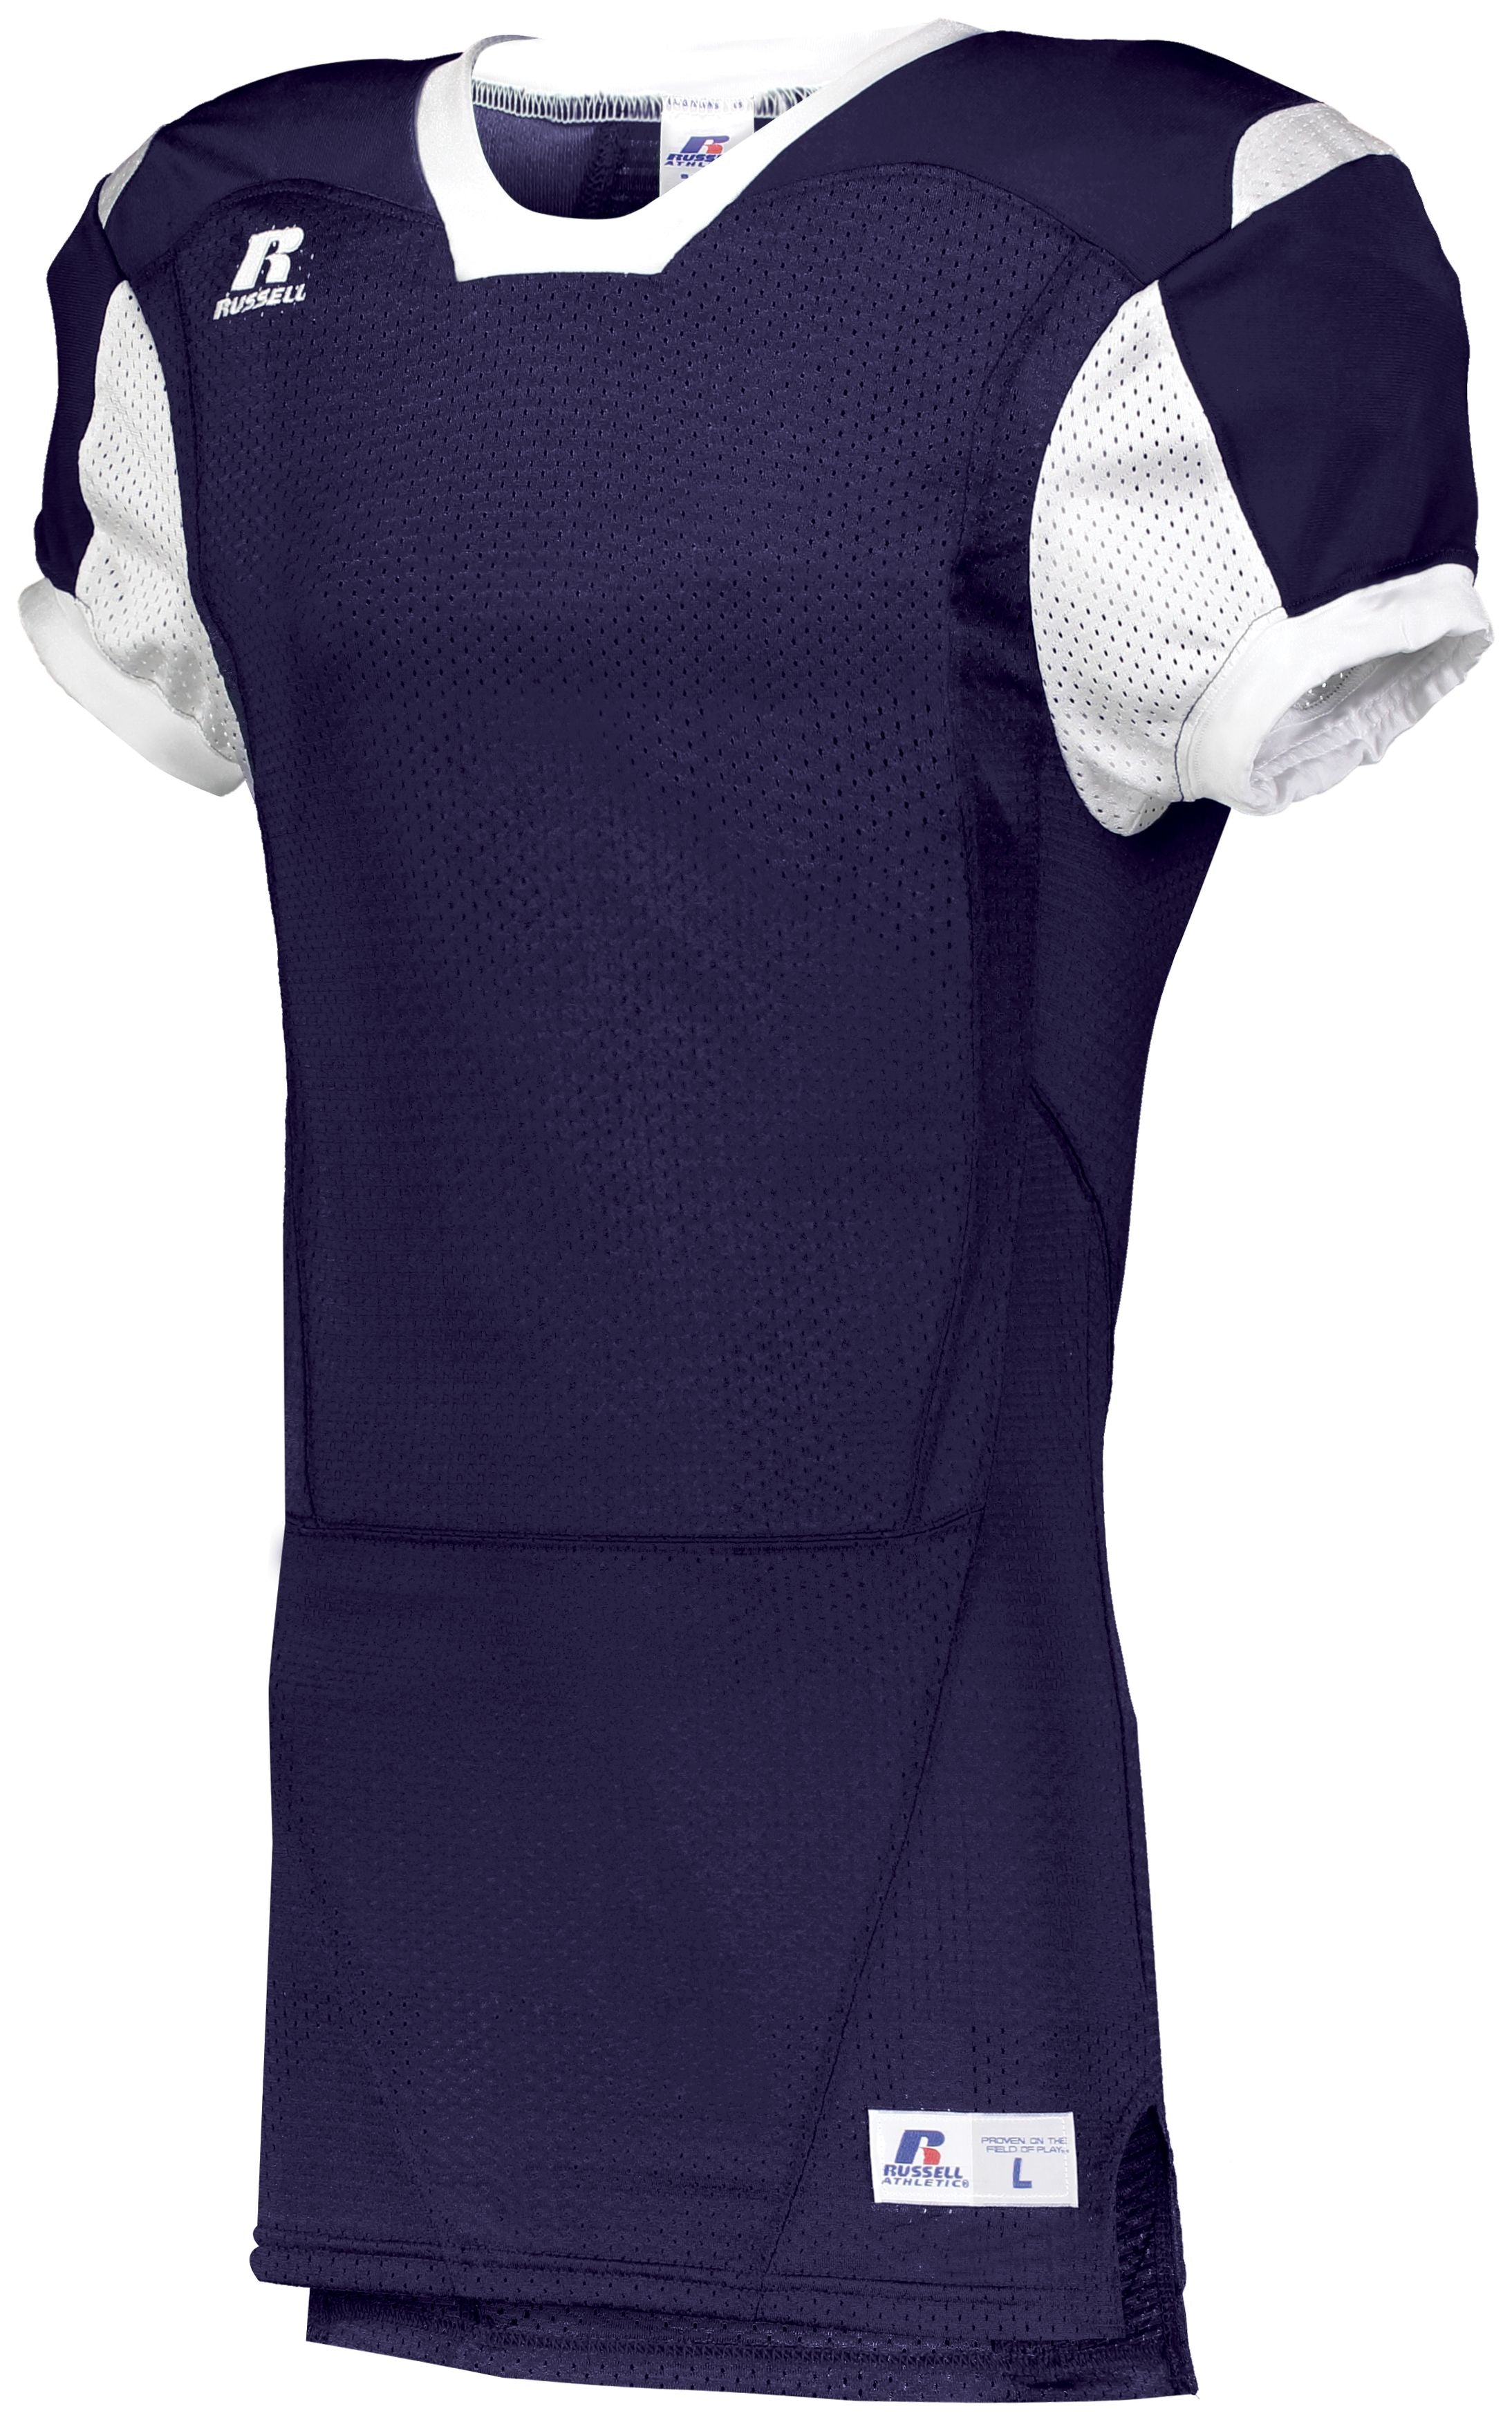 Russell Athletic Youth Color Block Game Jersey in Purple/White  -Part of the Youth, Youth-Jersey, Football, Russell-Athletic-Products, Shirts, All-Sports, All-Sports-1 product lines at KanaleyCreations.com